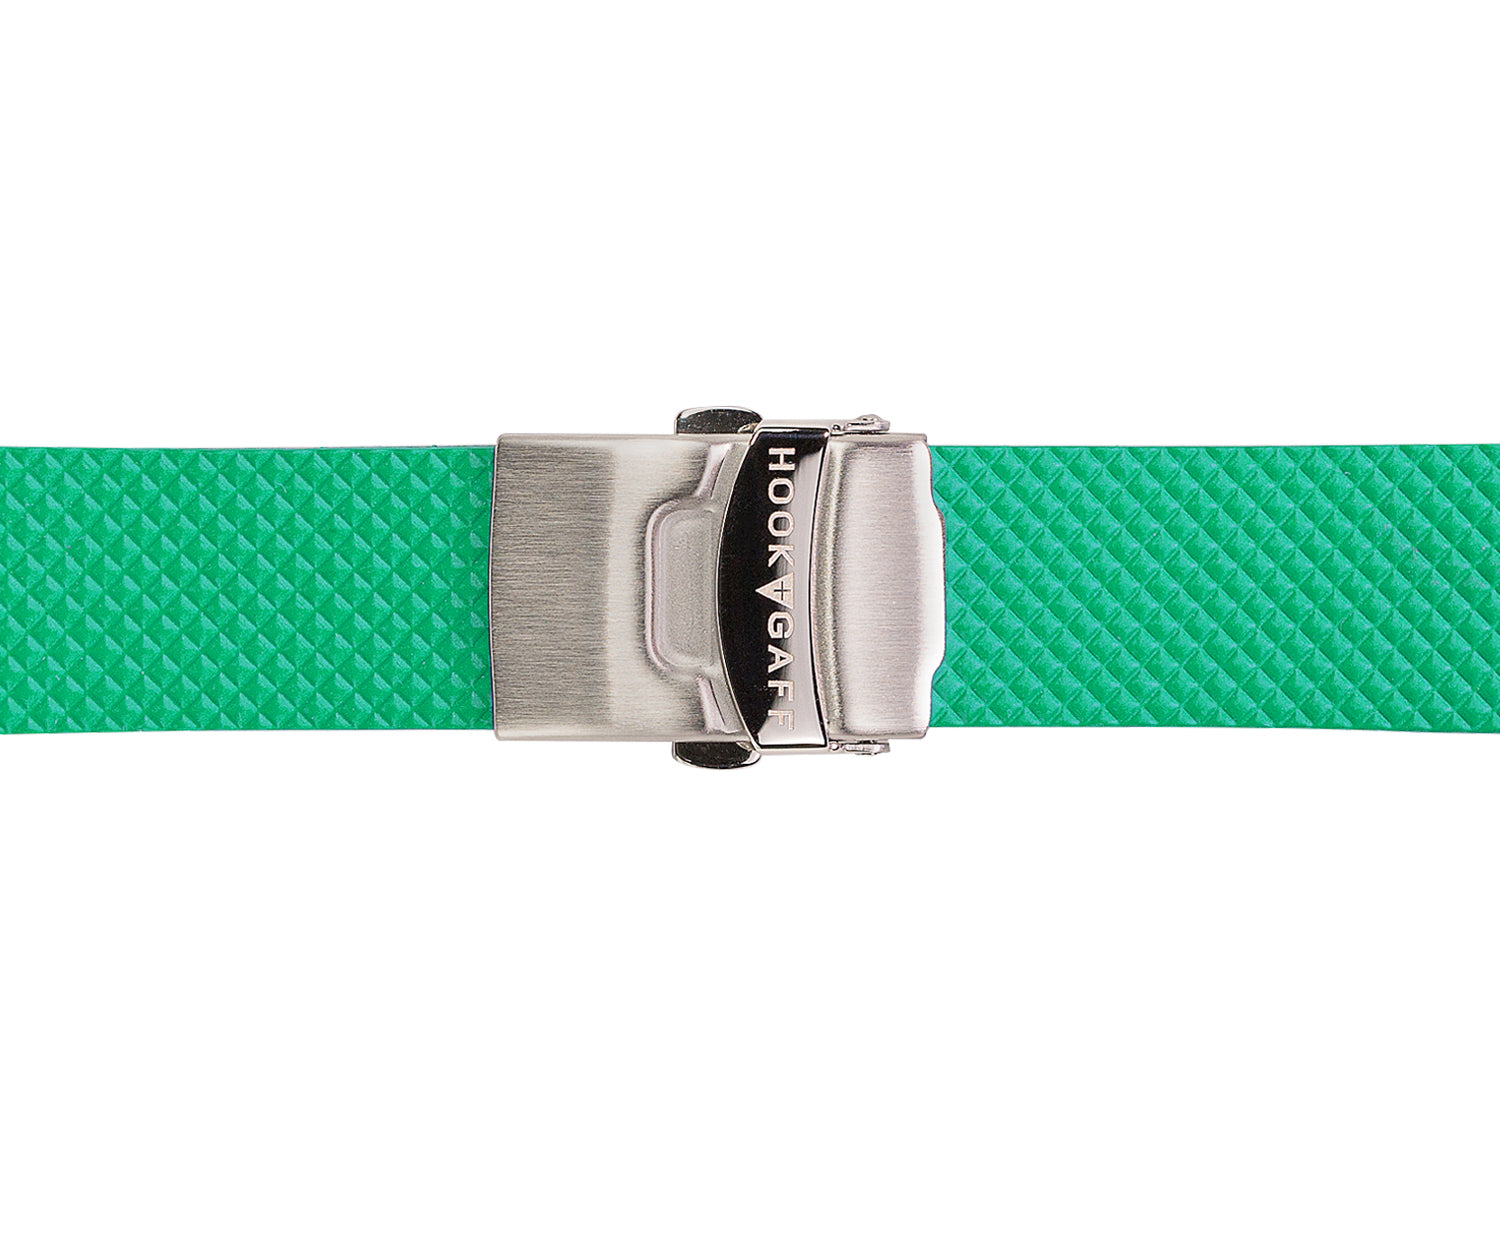 20mm Rubber Dive Strap - (Fits Sportfisher 3, Women's Golf, and Captain's Watch)